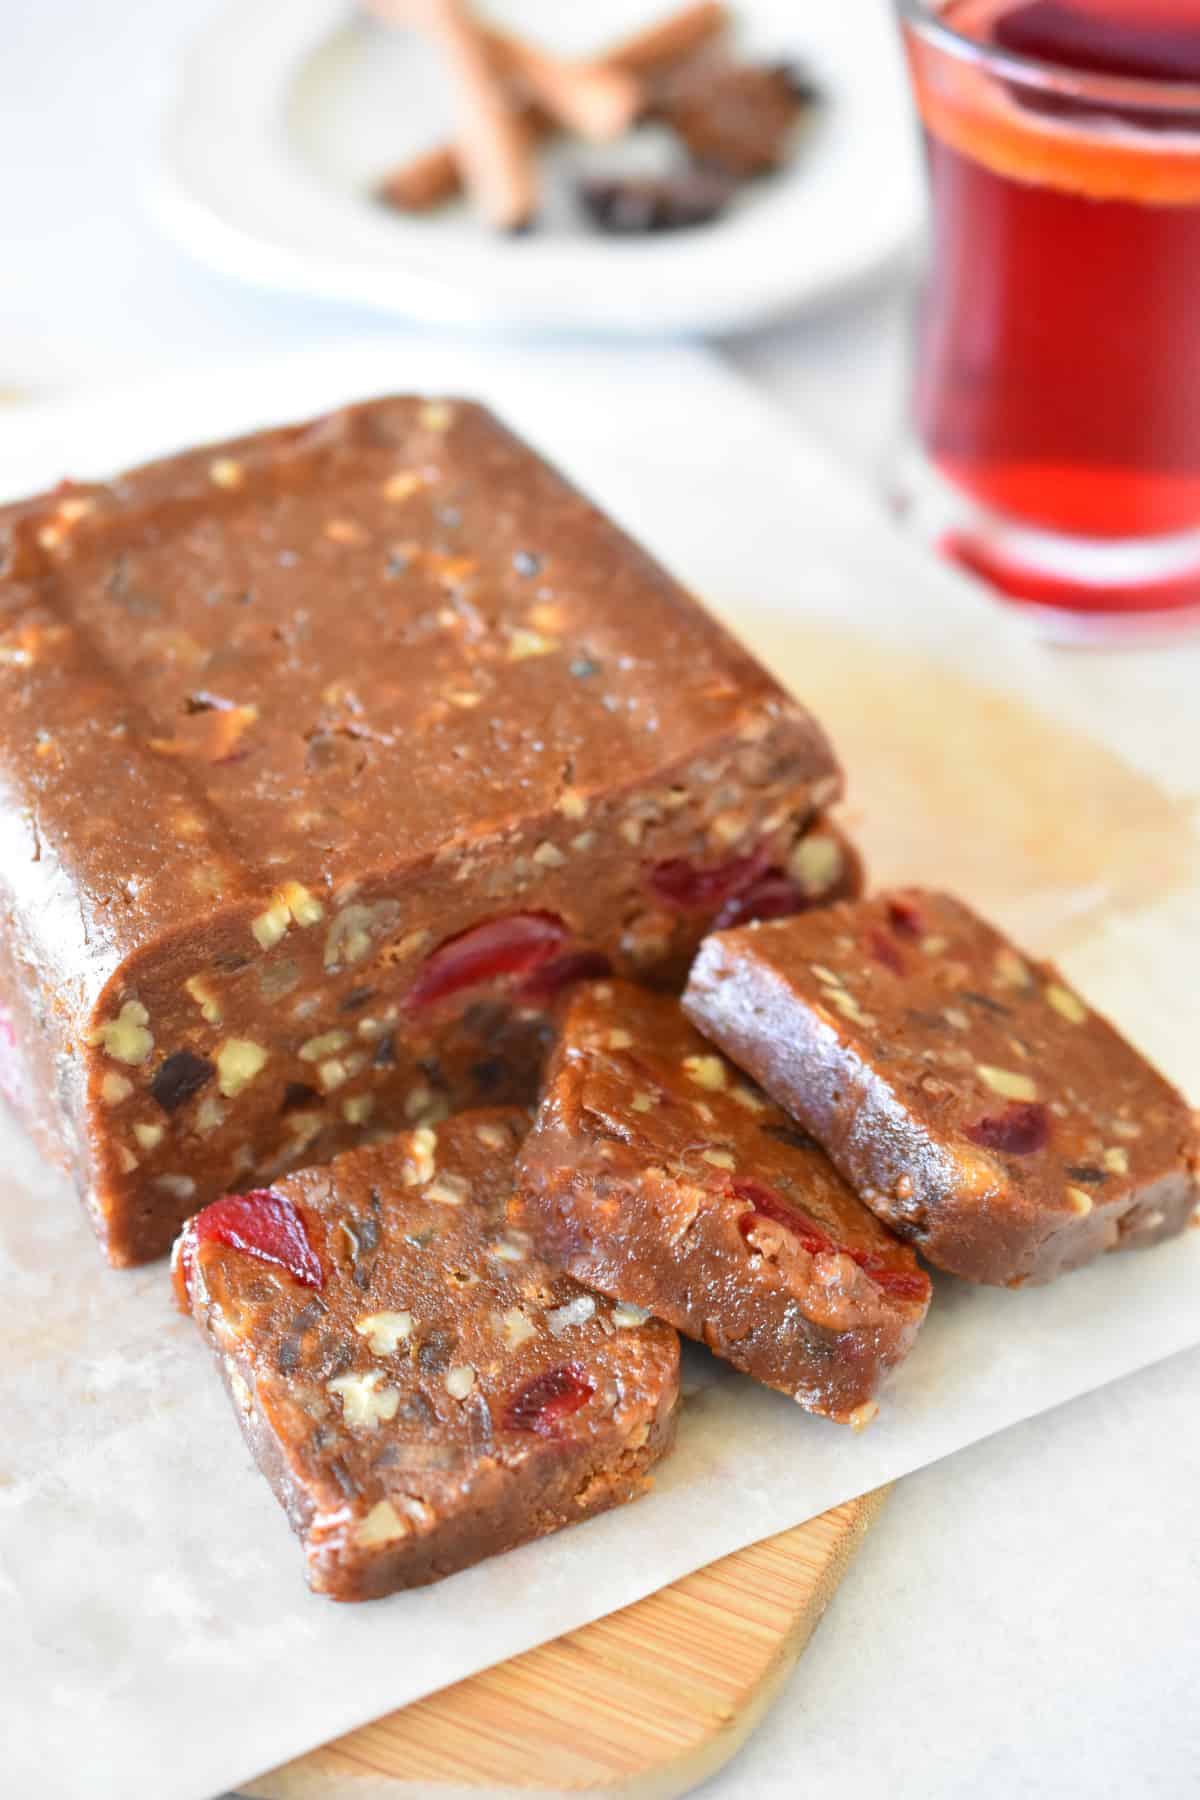 A loaf of fruitcake with a few square slices on a parchment paper covered cutting board.